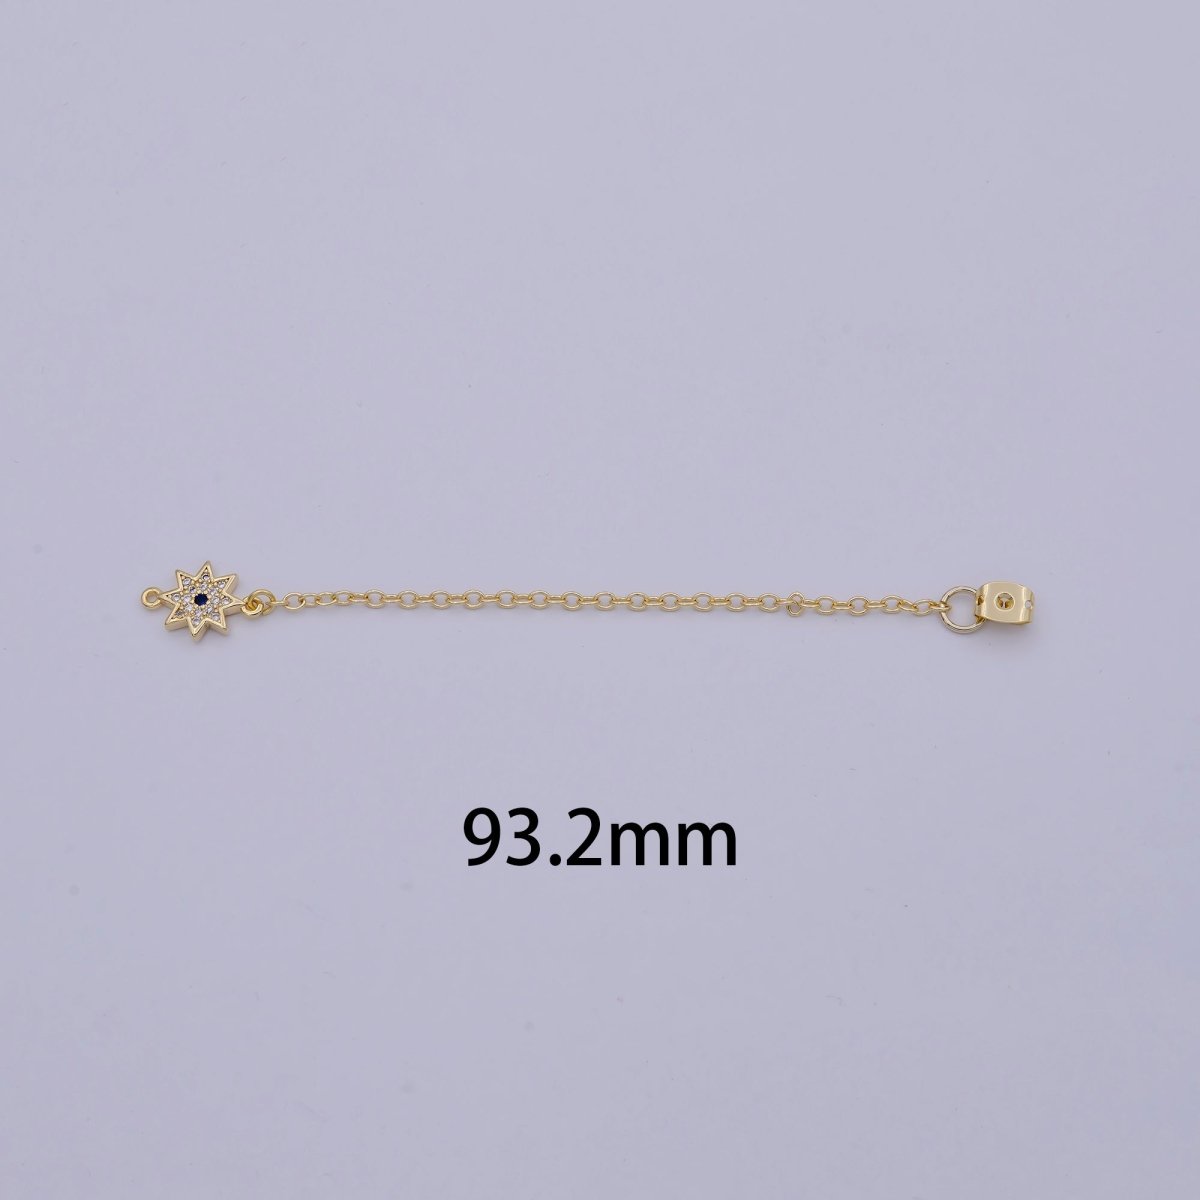 Back stopper w/ chain cz North Star Charm 2 pcs Gold Filled Nickel free, Butterfly clutch chain Dainty earring back K-198 - DLUXCA